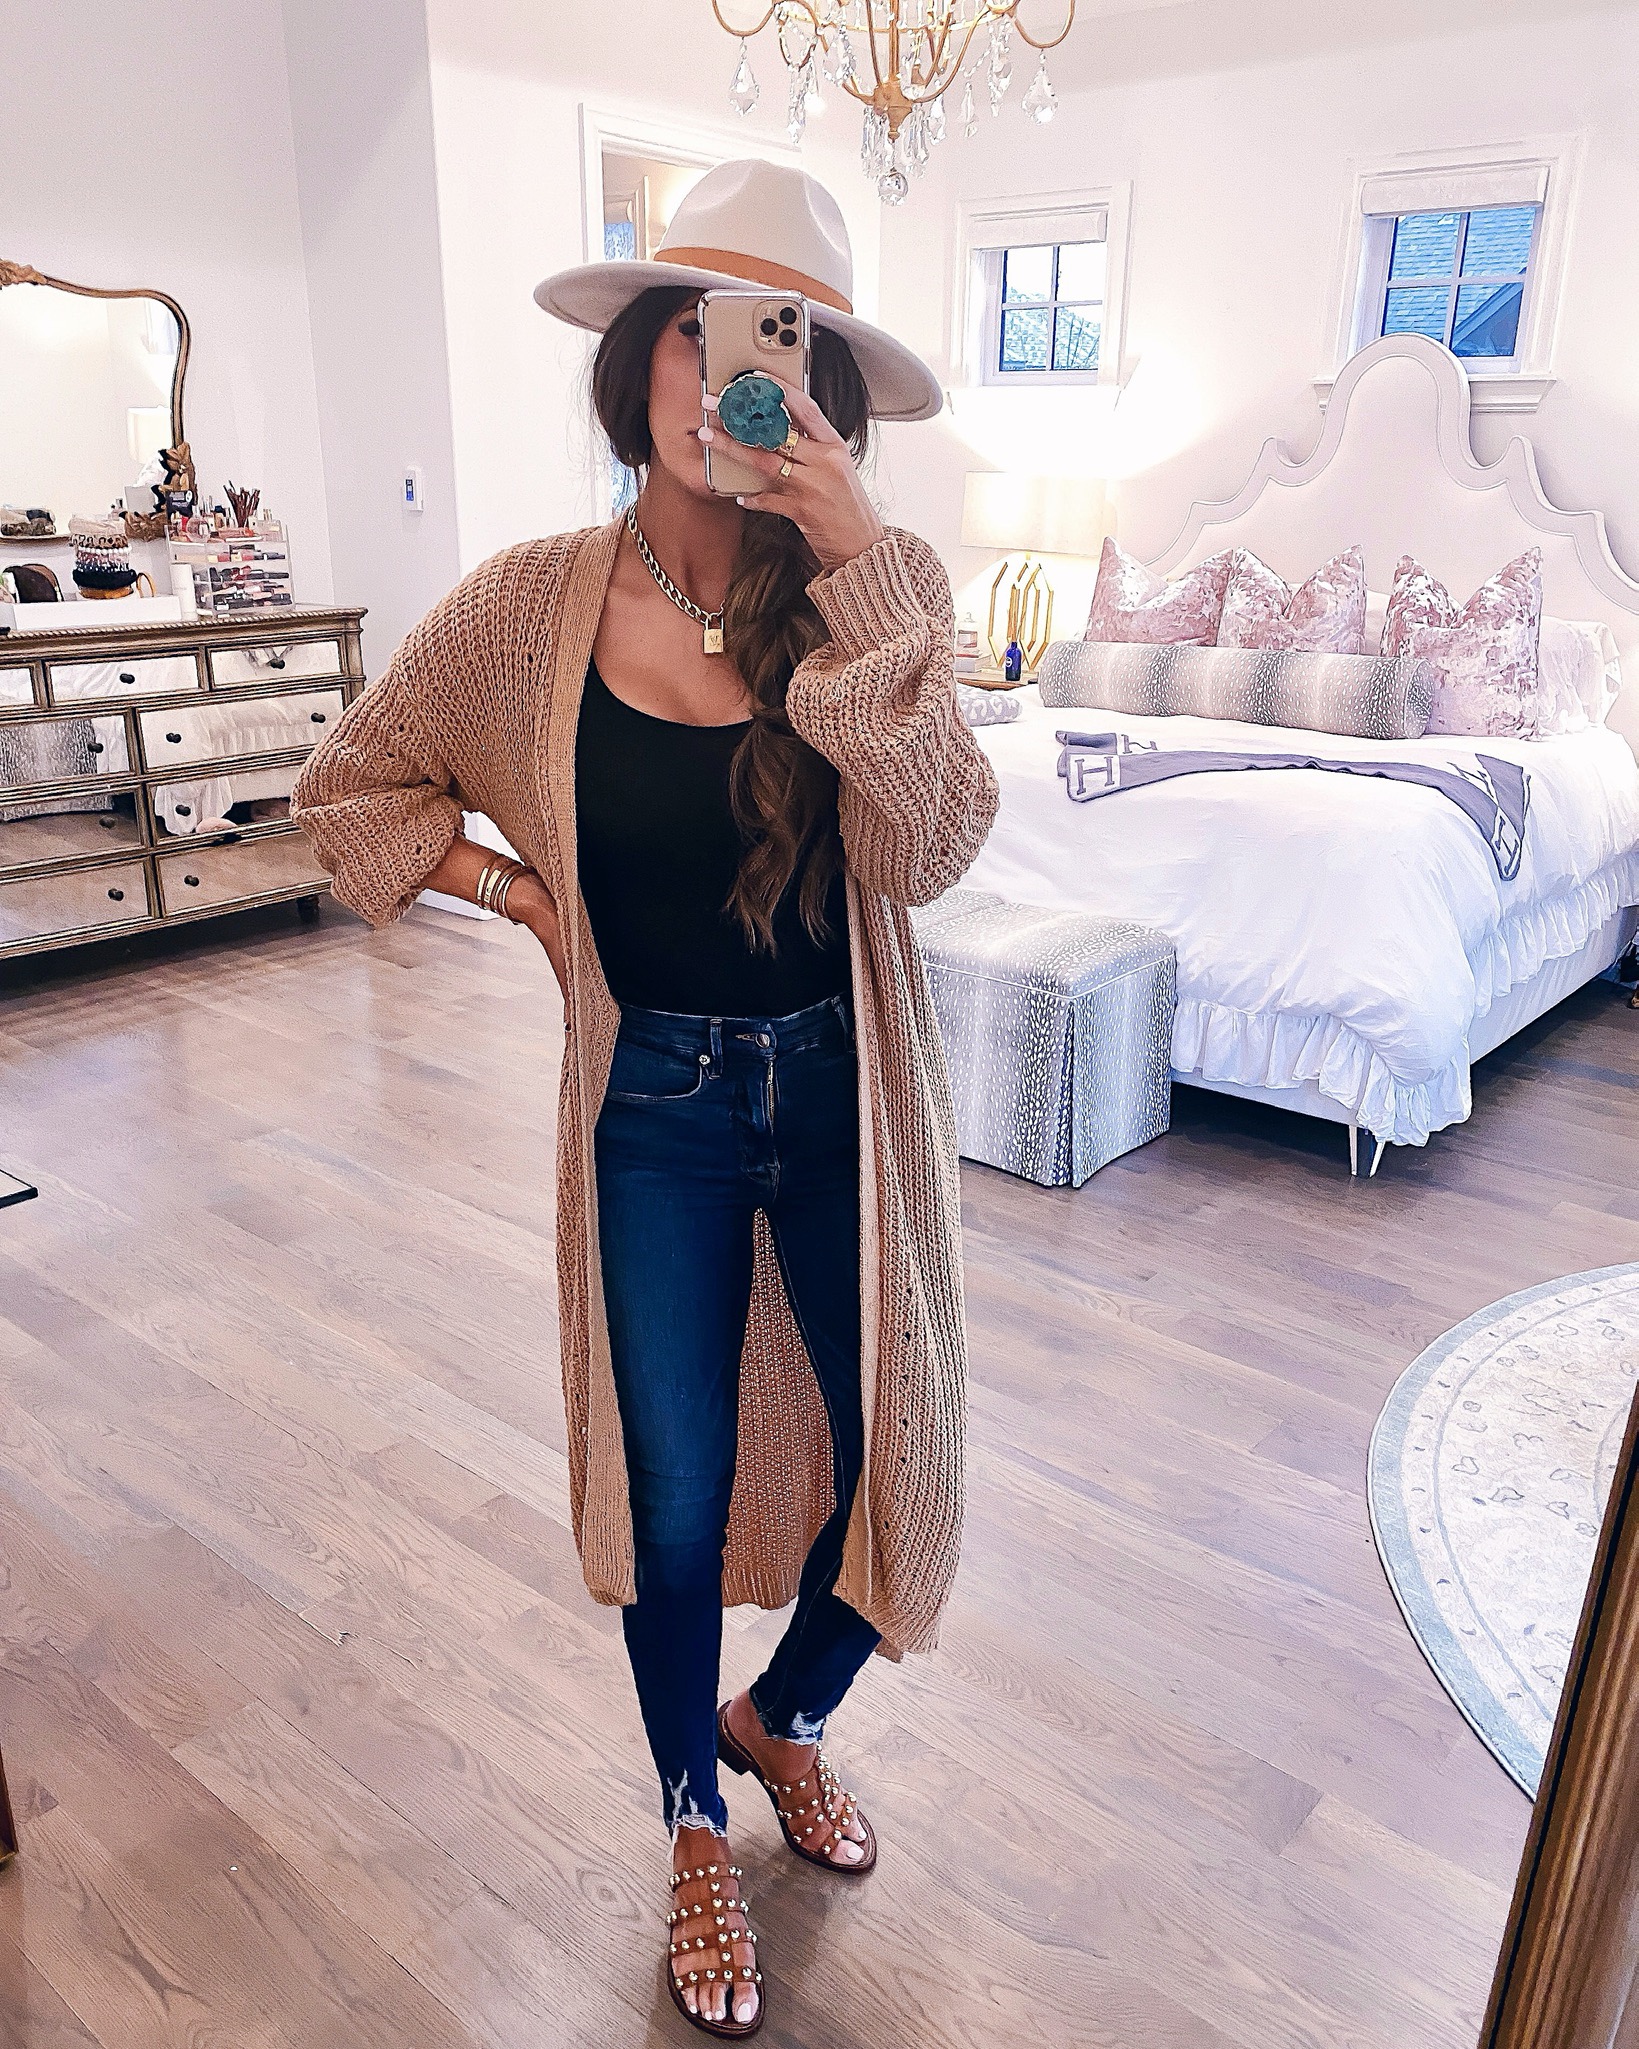 Spring Sales by popular US life and style blog, The Sweetest Thing: image of a woman wearing Nordstrom Good Waist Distressed High Waist Ankle Skinny Jeans GOOD AMERICAN and Nordstrom Juniper Studded Gladiator Slide Sandal SAM EDELMAN.